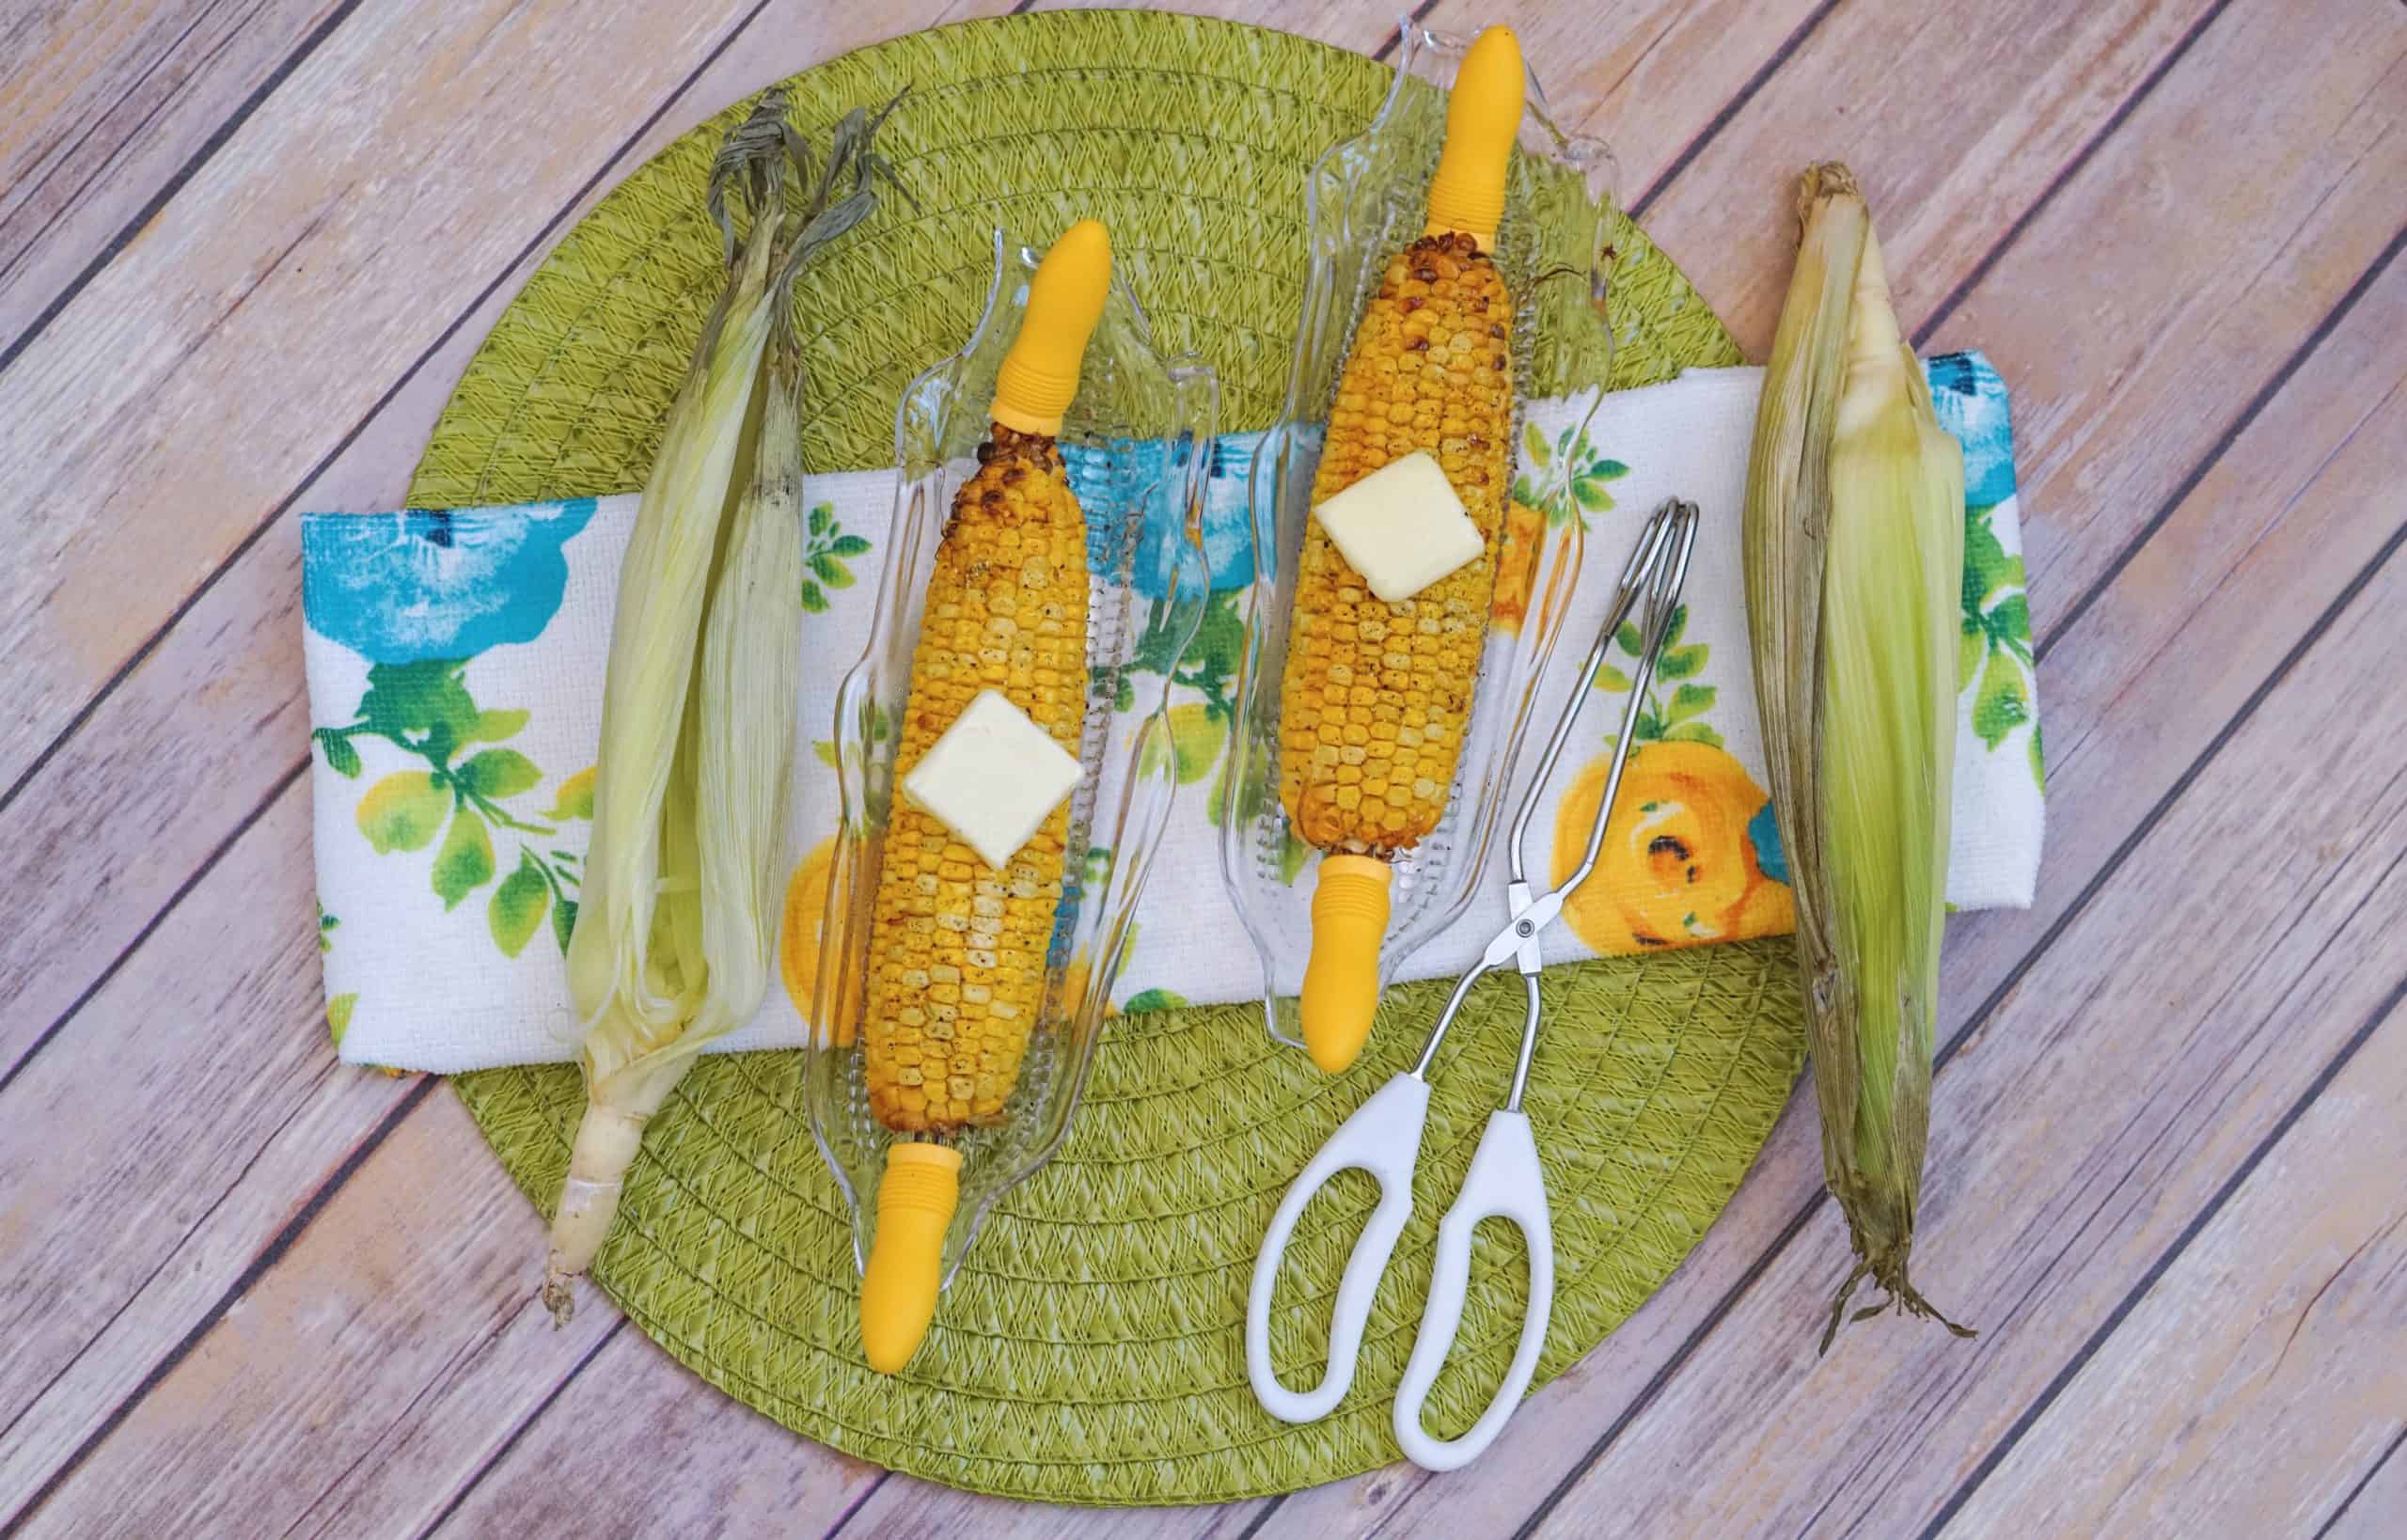 This air fryer corn on the cob is so yummy and just as easy as can be! The whole family loves it and I love that I don't have to boil the water and wait around. Just toss it in the air fryer and let it work it's magic!